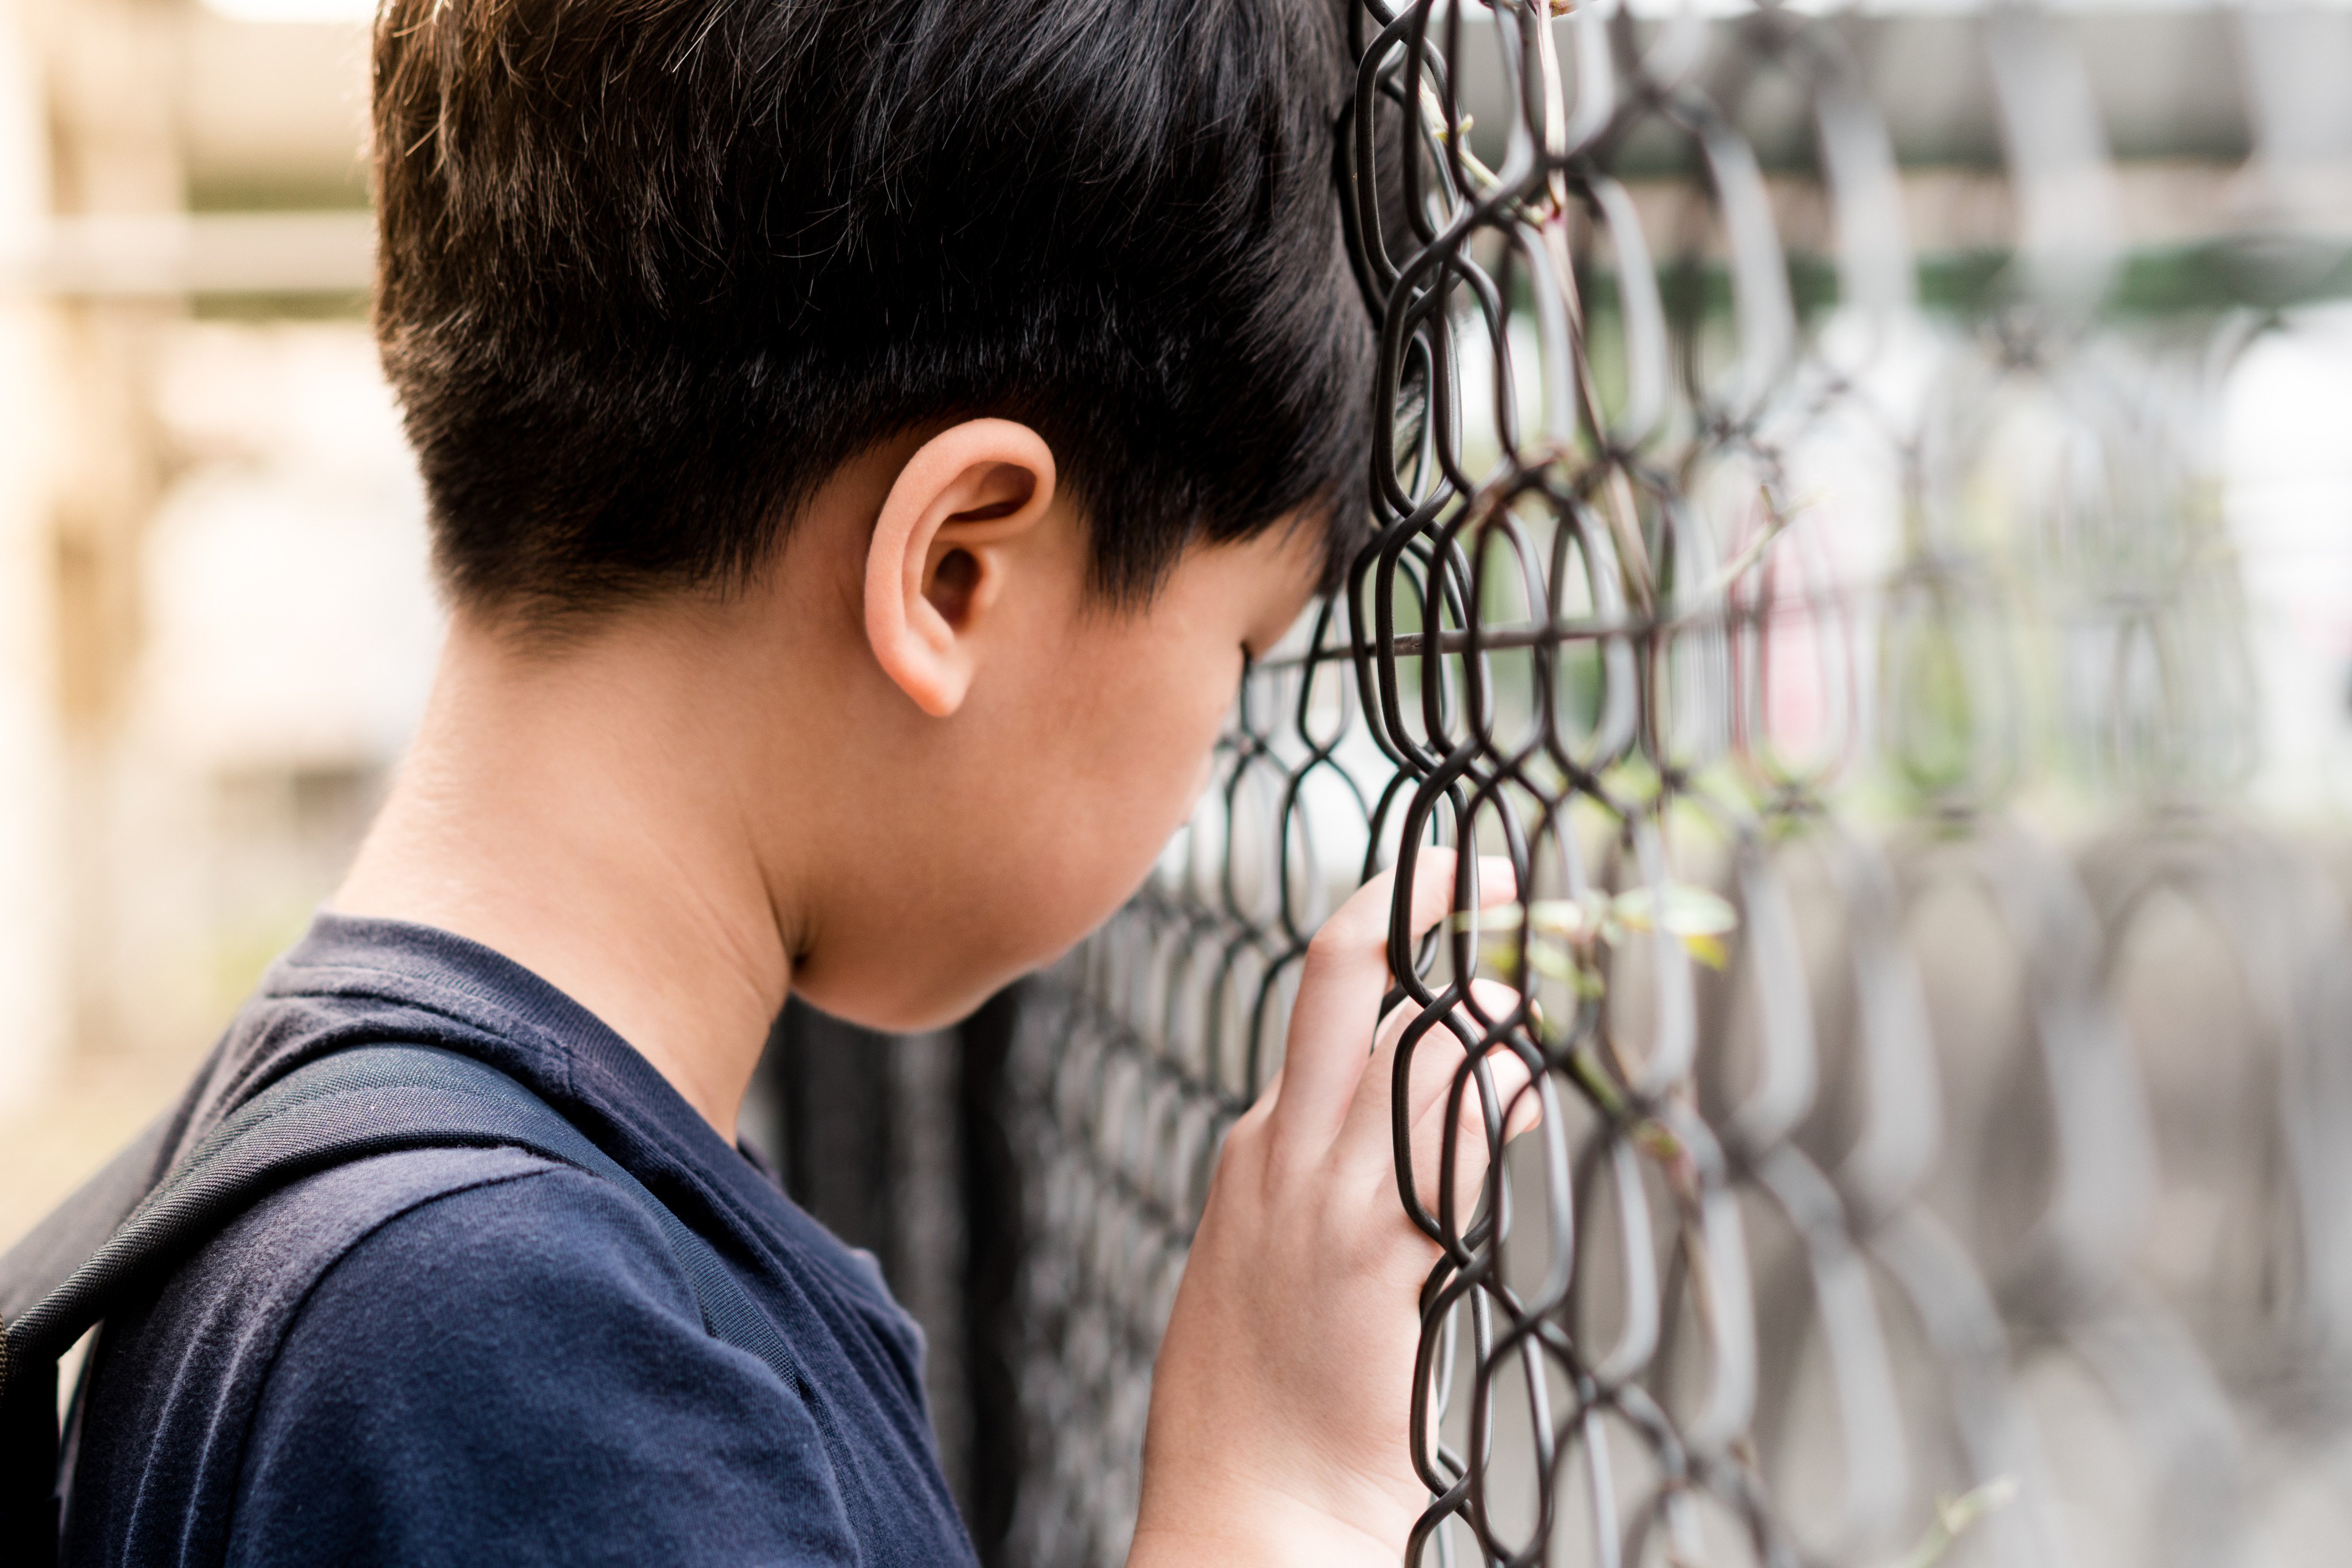 The case for the prioritisation of the mental wellness of children and adolescents is now overwhelming. Photo: Shutterstock